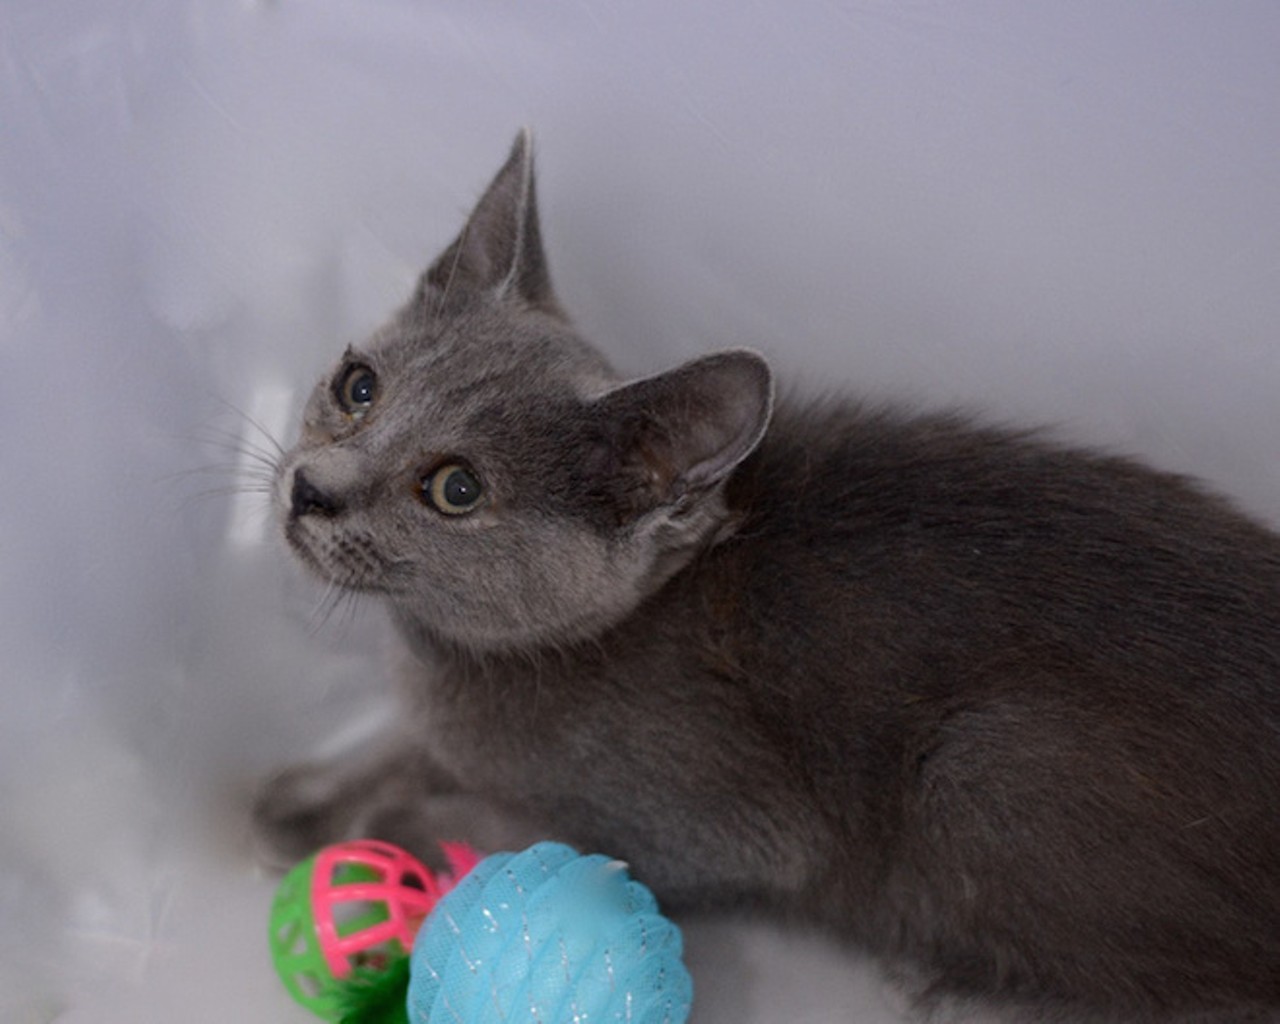 Kittens need homes! 15 adorable fluffballs that need homes now